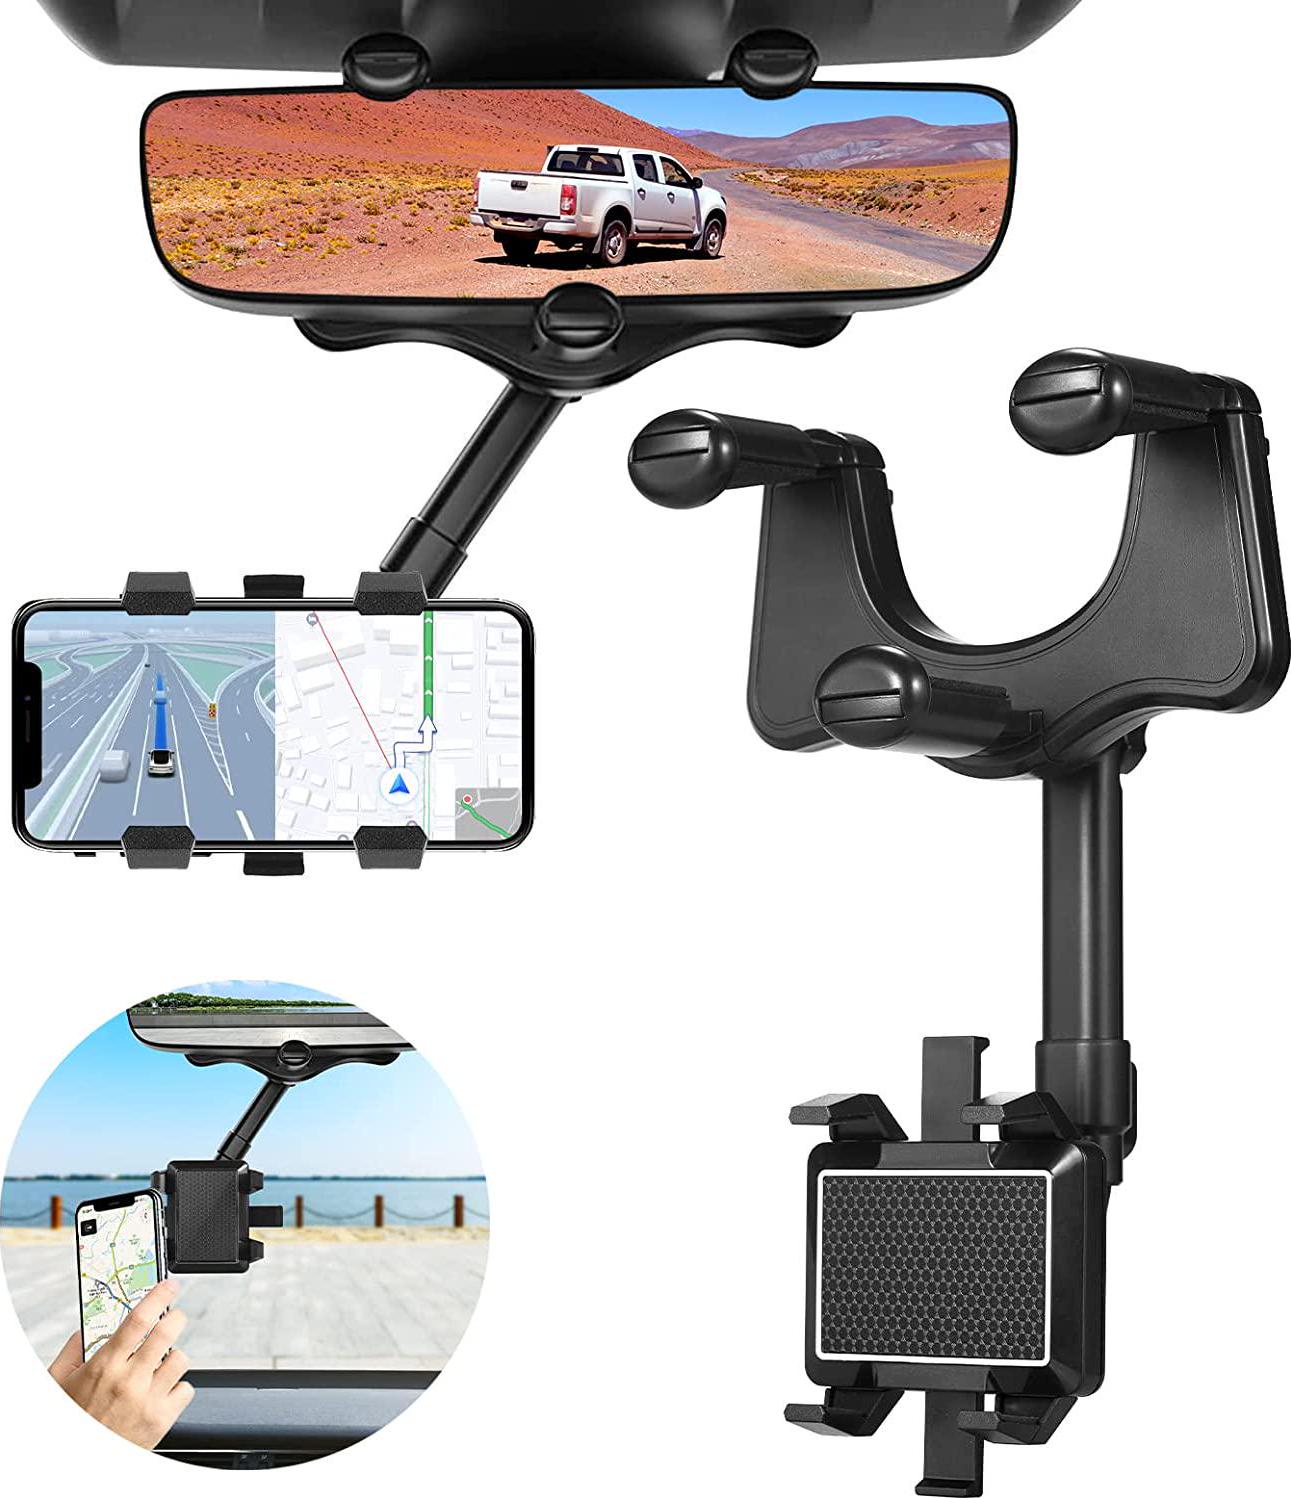 Jahy2Tech, 360° Rearview Mirror Phone Holder,Rotatable and Adjustable Car Phone Mount, Multifunctional Adjustable Car Phone Holder Compatitable with All Phones Black